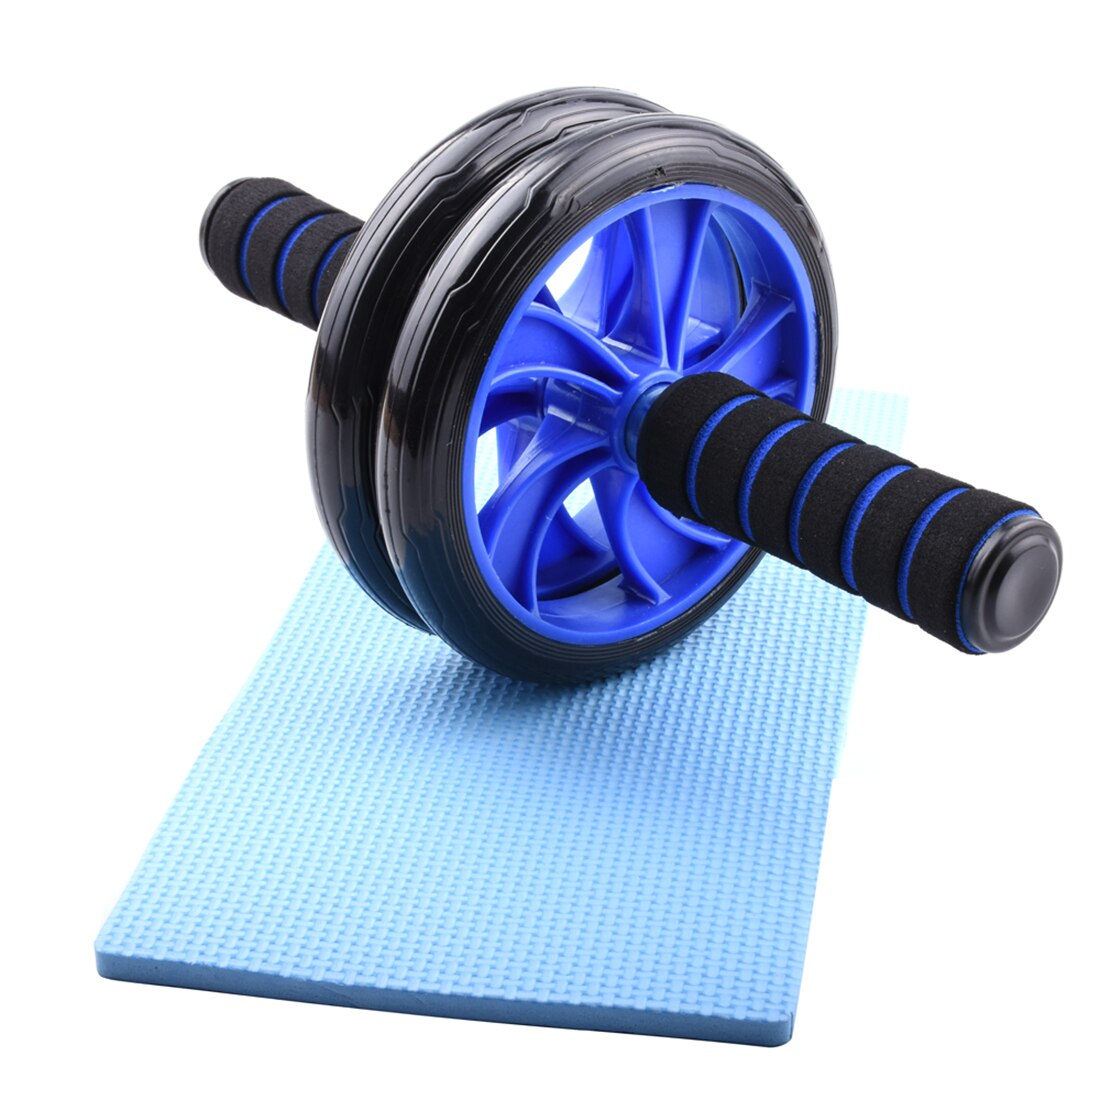 AB Roller Wheel Abdominal Exercise Jump Rope Push up Rack Resistance Bands Muscle Trainer Fitness Home Gym Workout Equipment: Blue